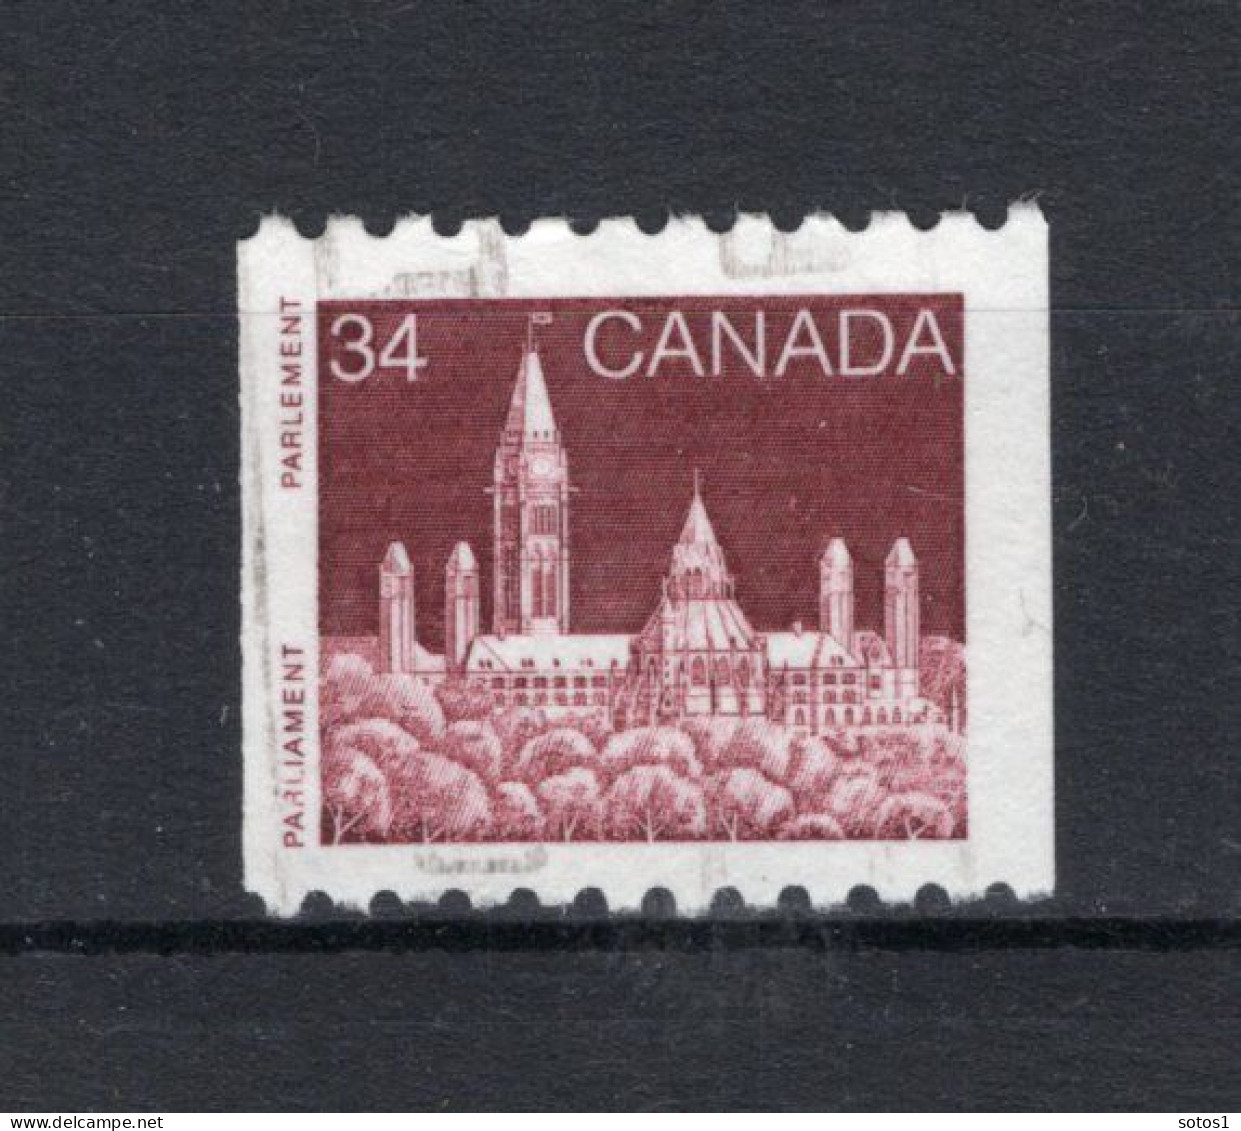 CANADA Yt. 913° Gestempeld 1985-1986 - Used Stamps